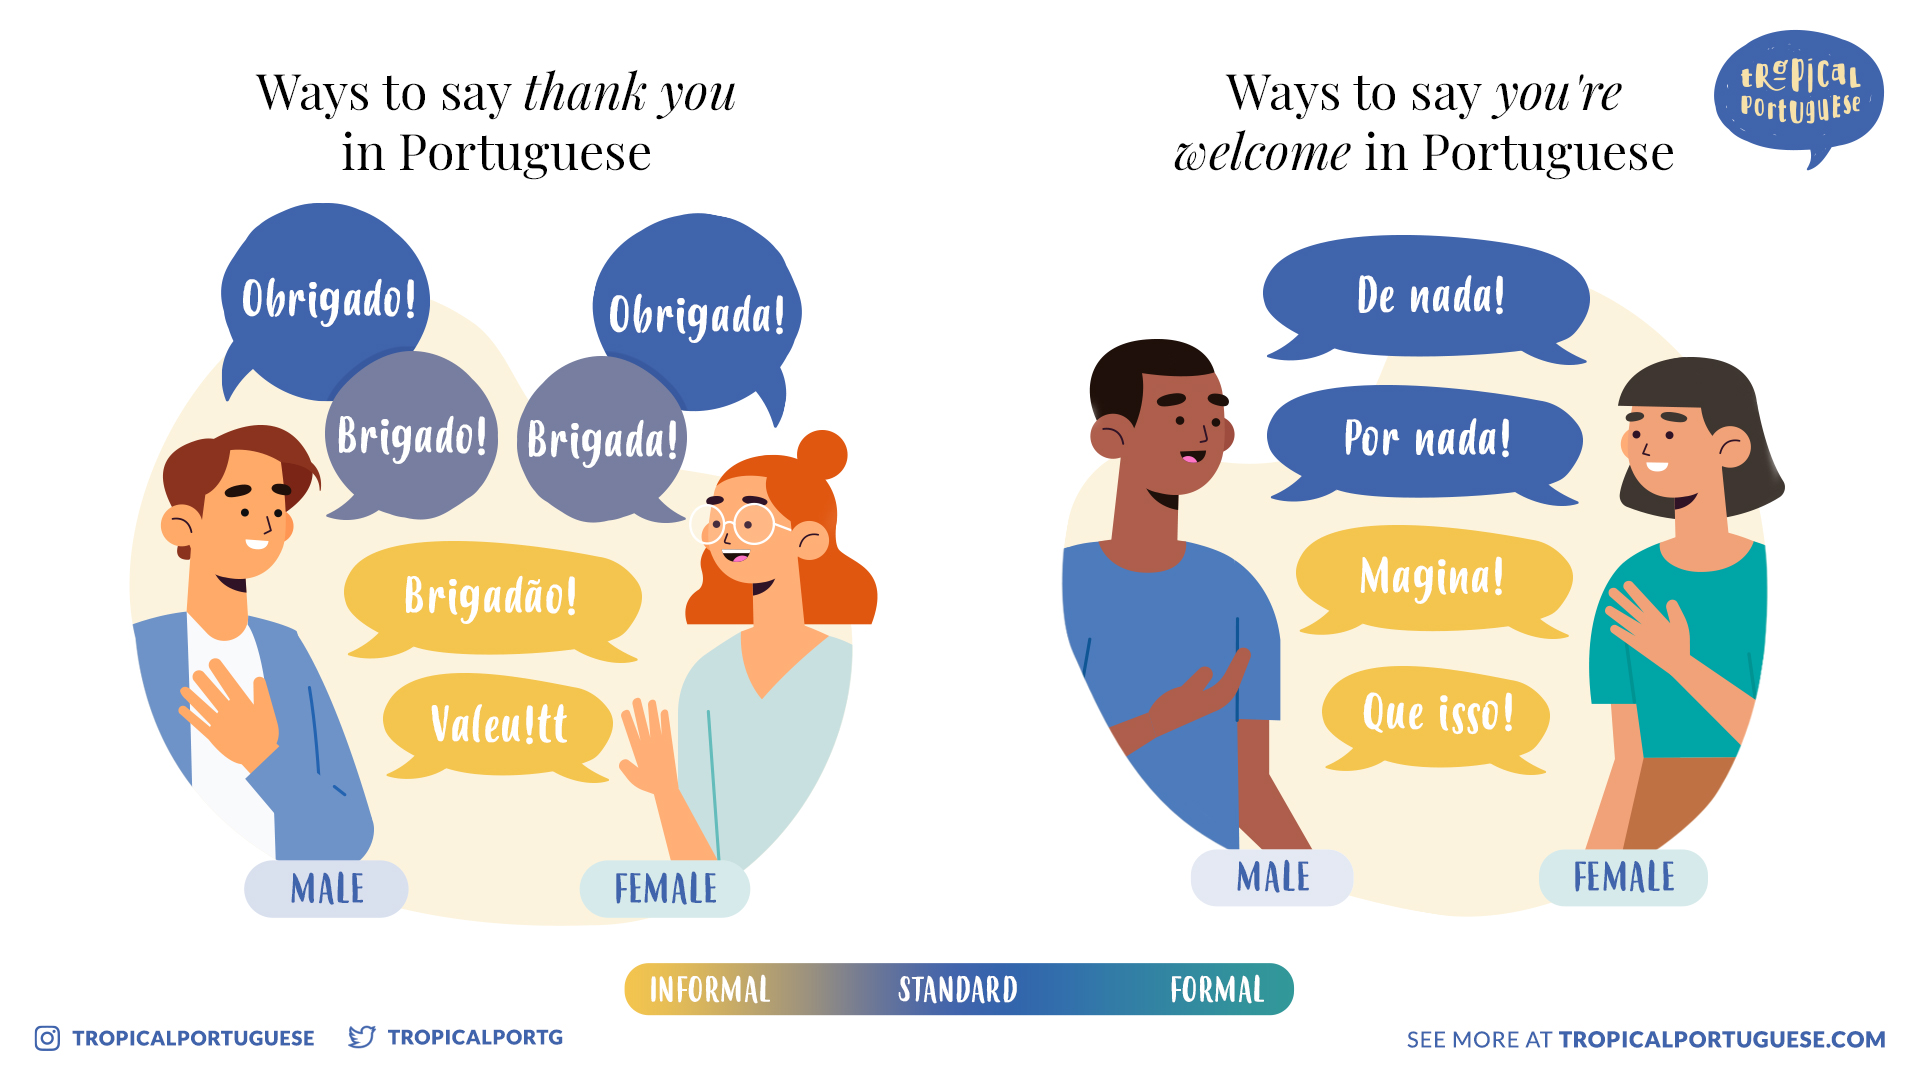 all the ways to say thanks and you're welcome in Portuguese